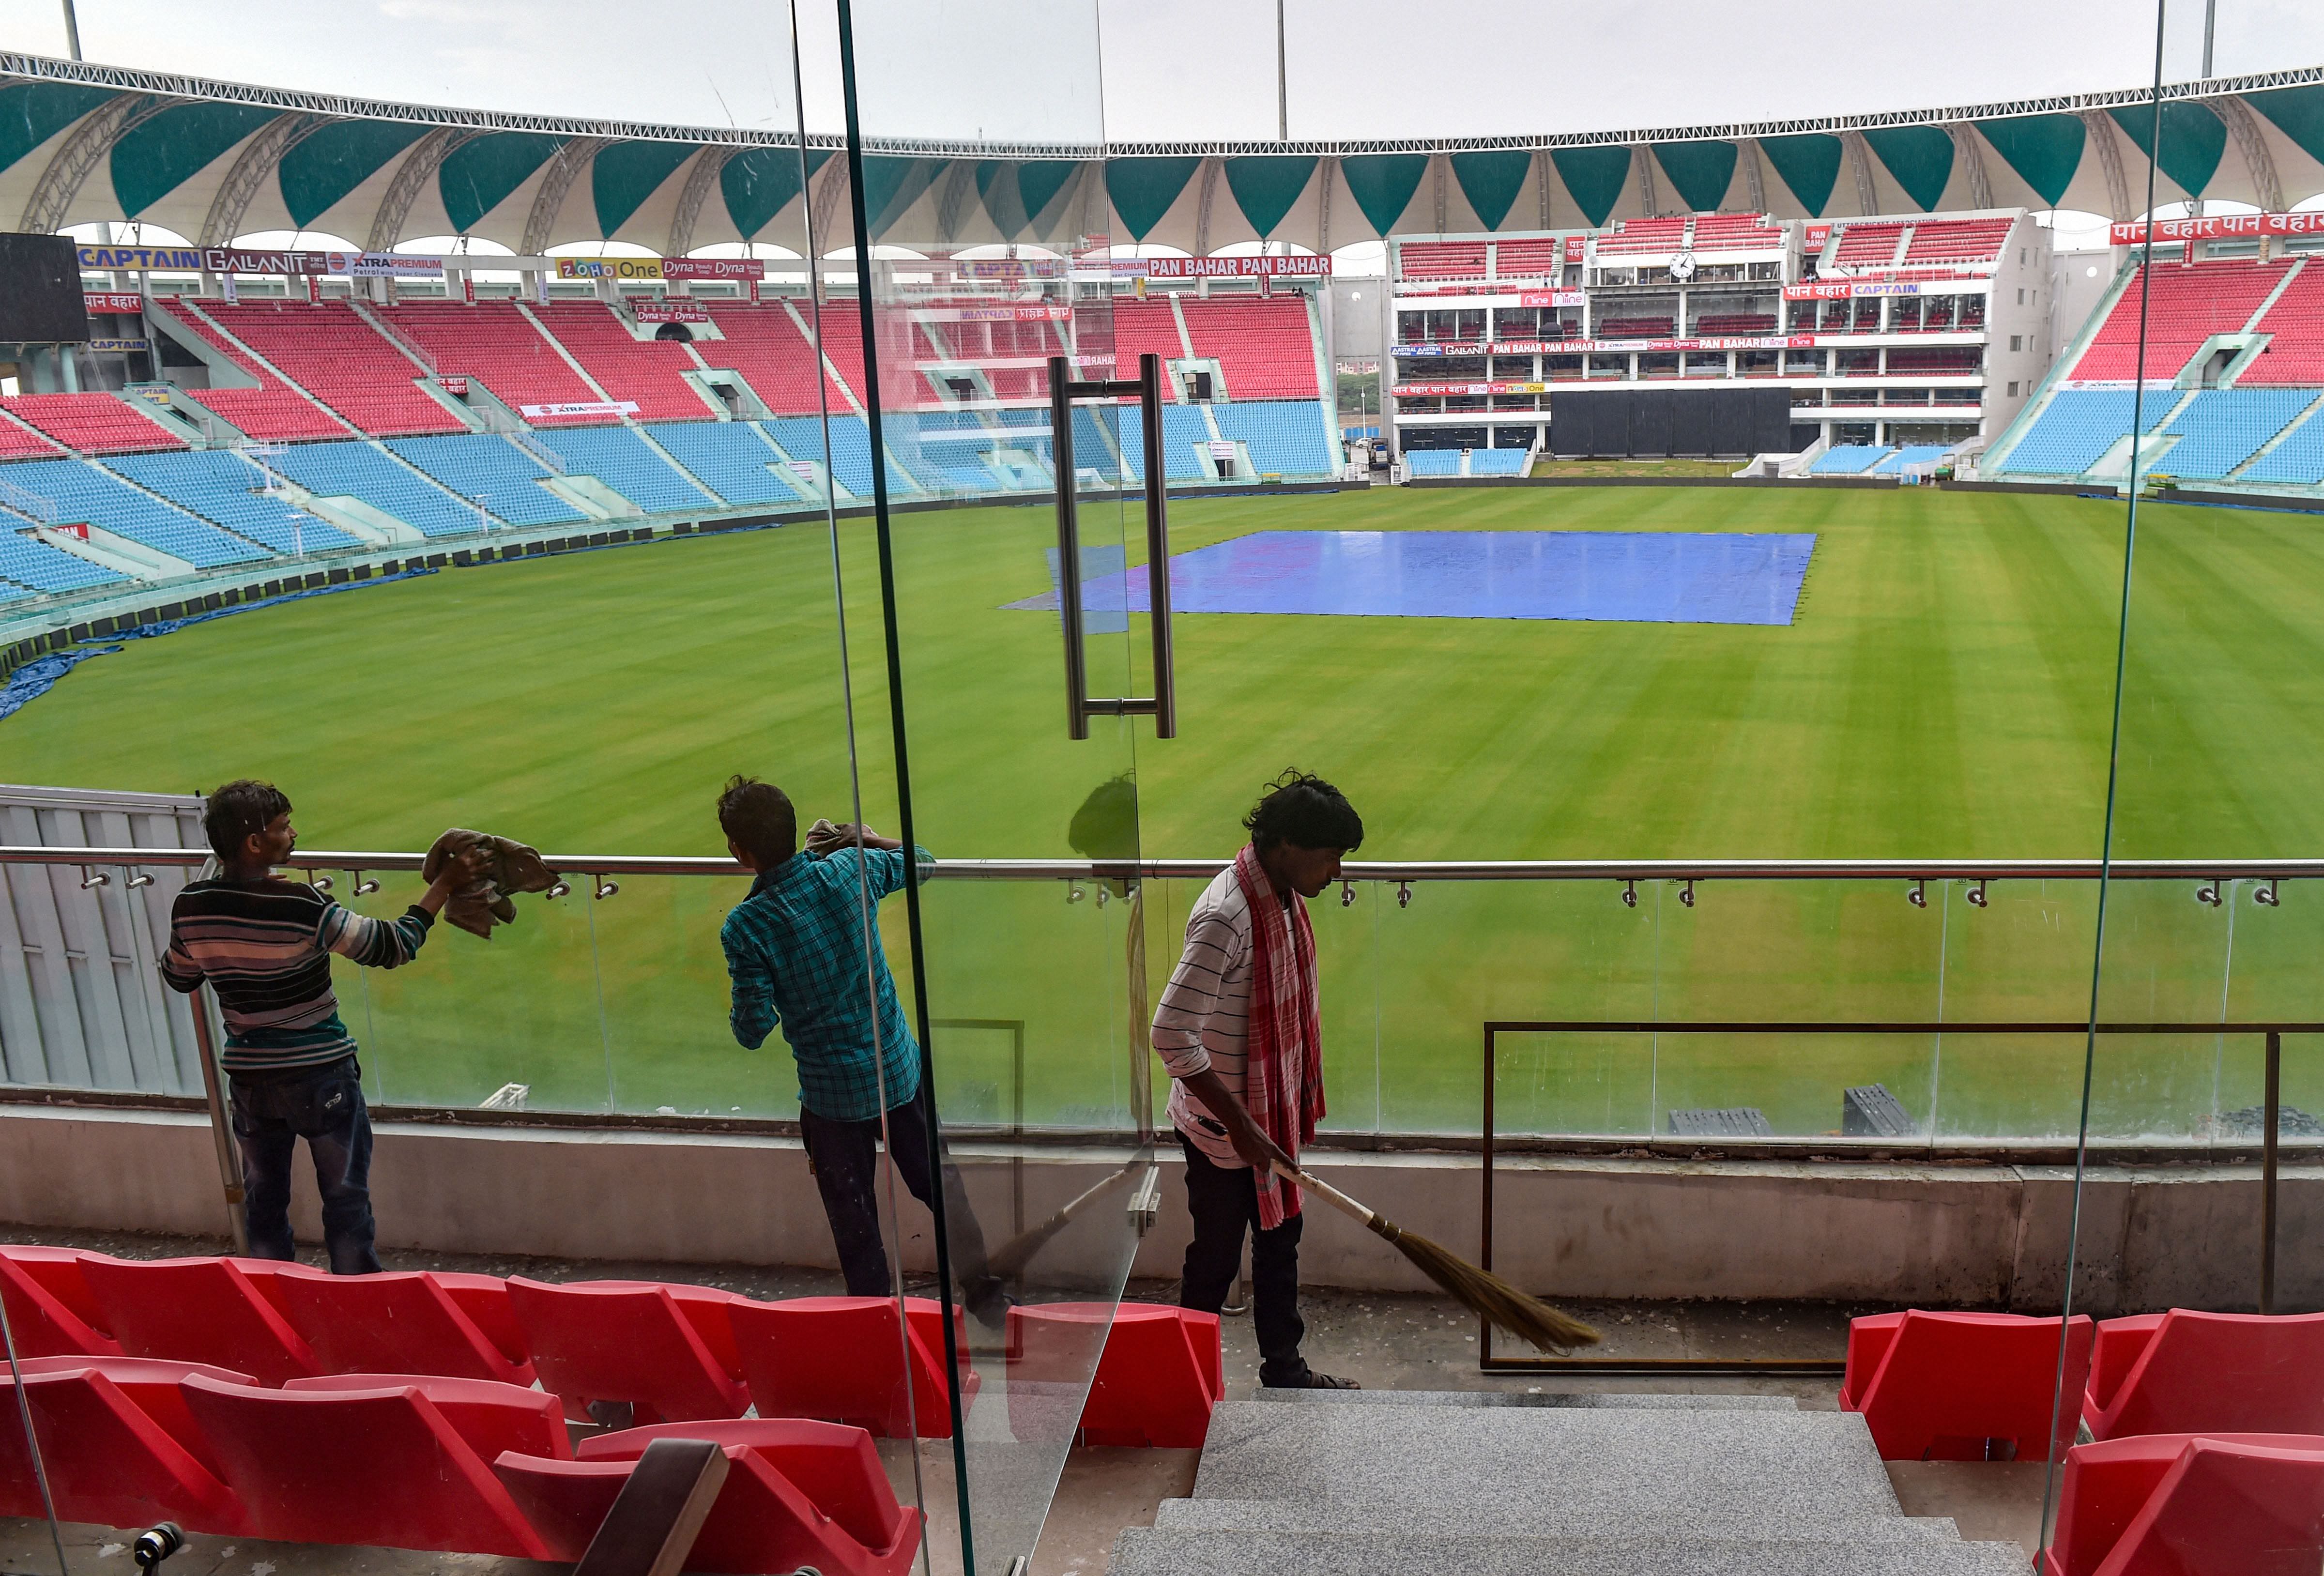 Workers clean a railing of Bharat Ratna Shri Atal Bihari Vajpayee Ekana Cricket Stadium, where the 2nd ODI match between India and South Africa was scheduled, in Lucknow. (PTI Photo)